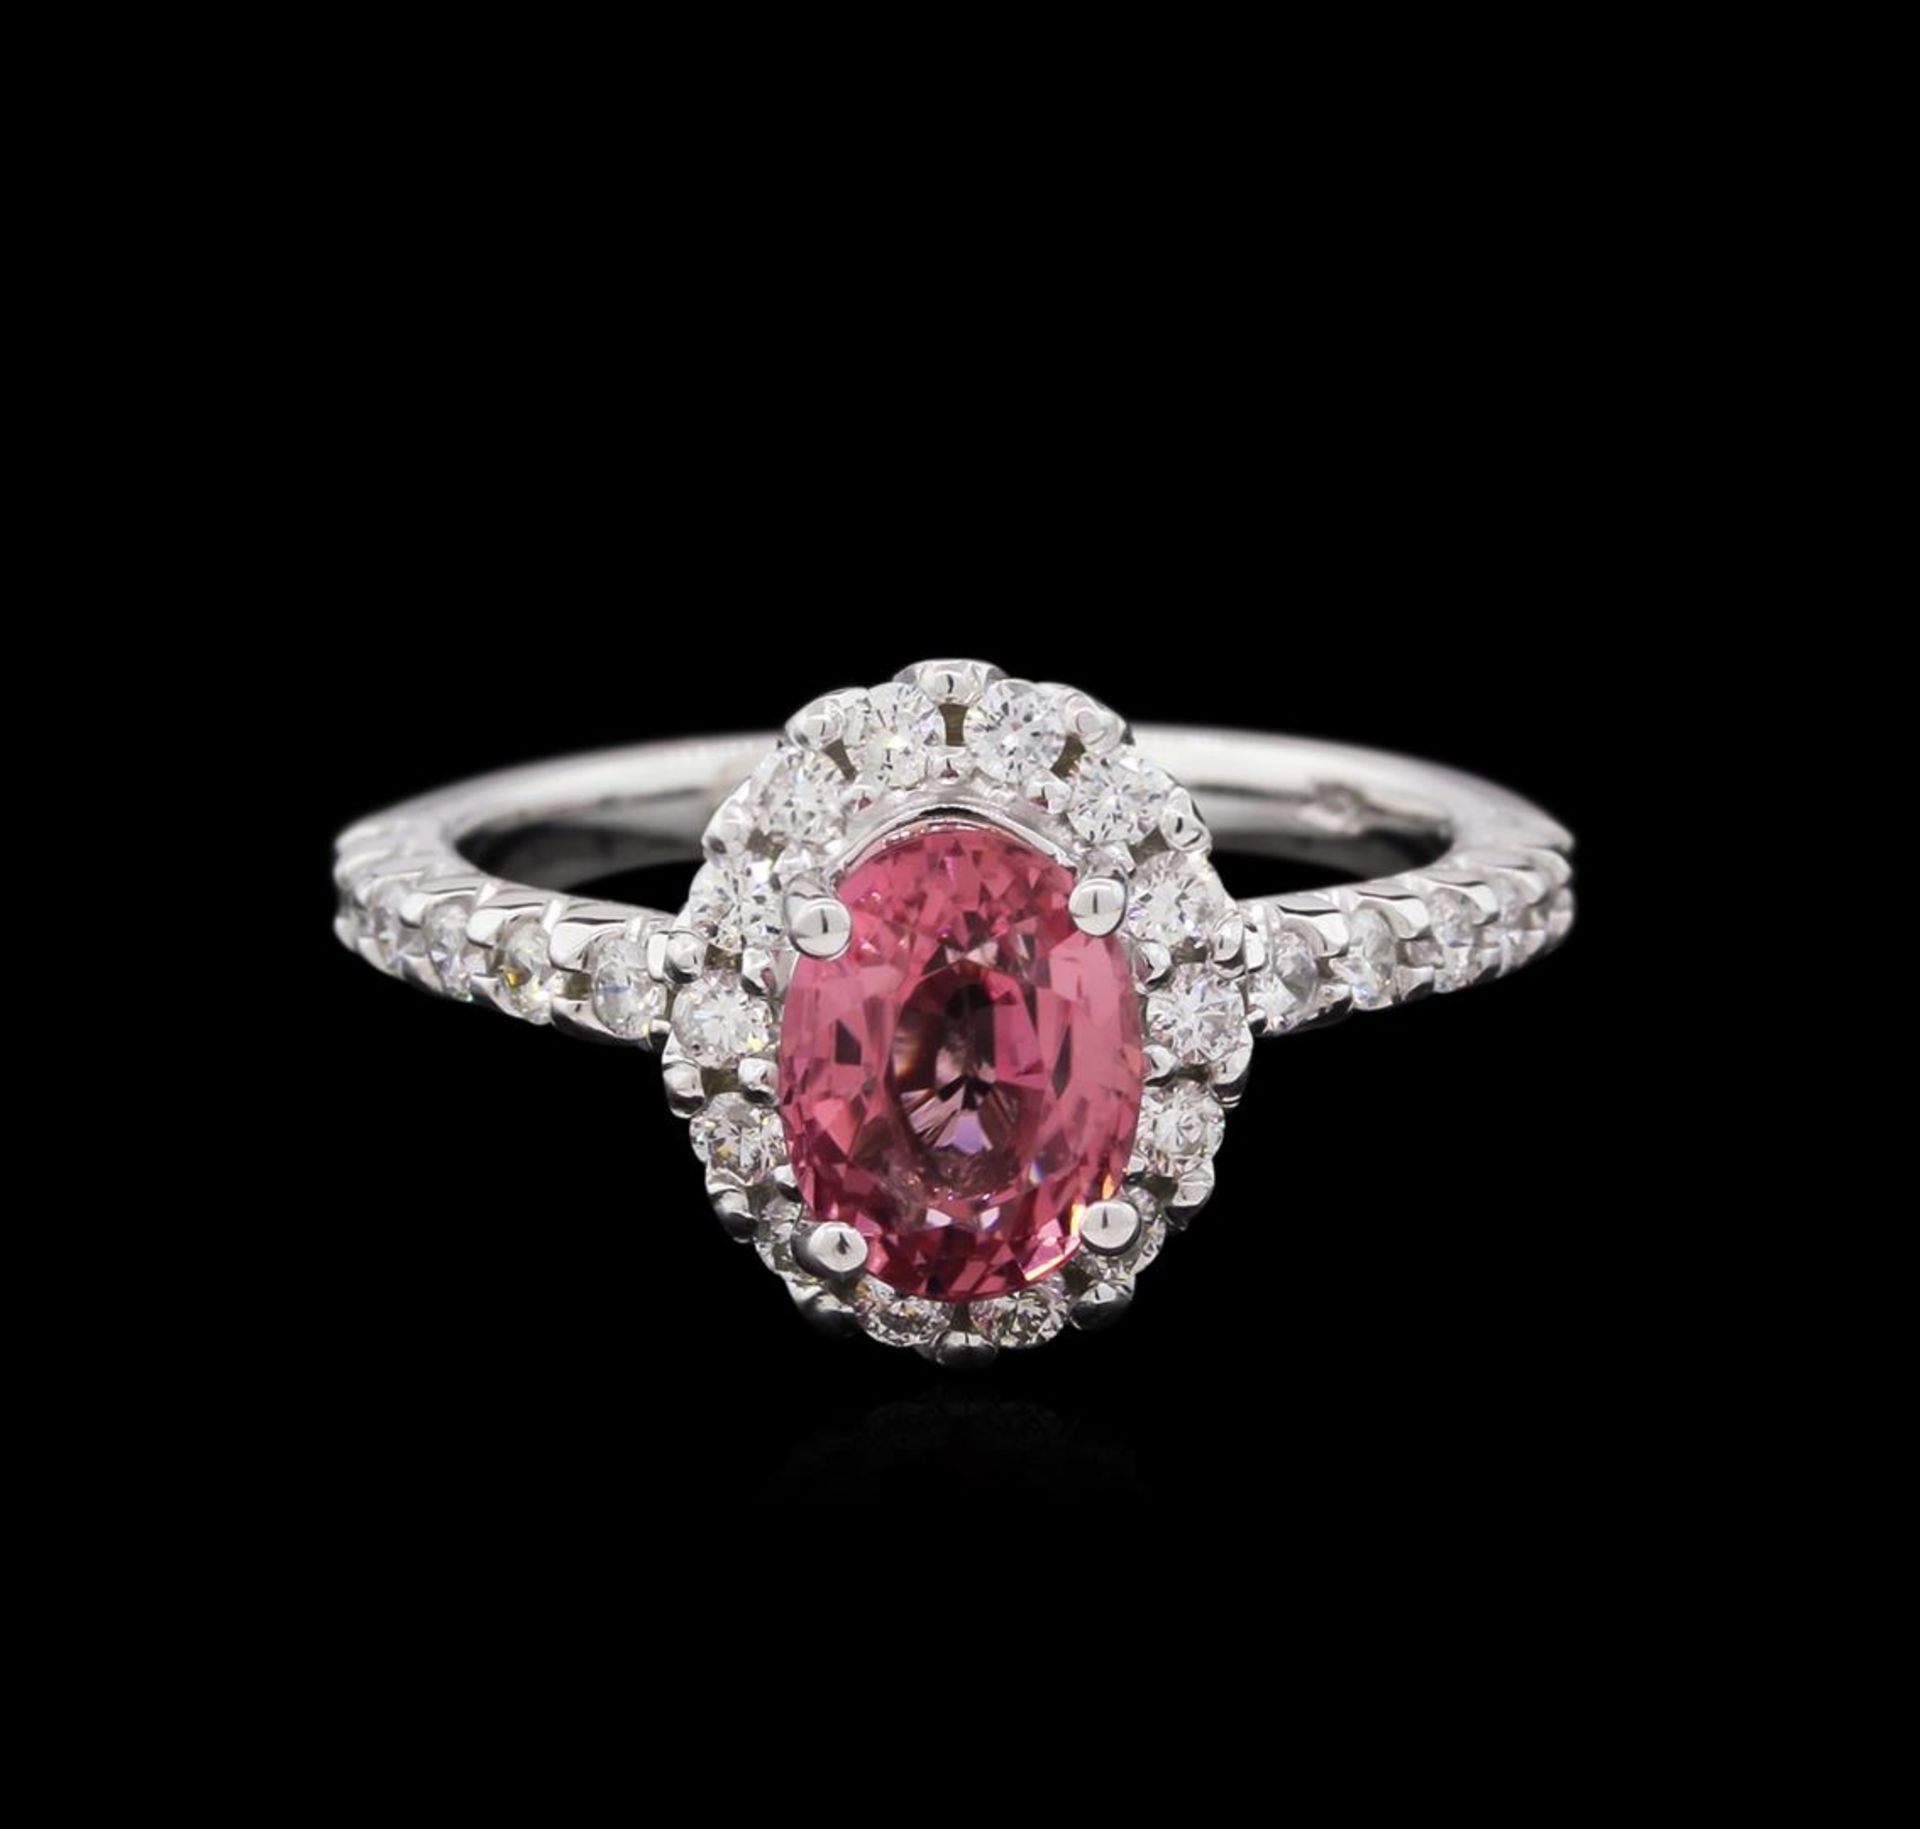 1.70ct Pink Tourmaline and Diamond Ring - 14KT White Gold - Image 2 of 2